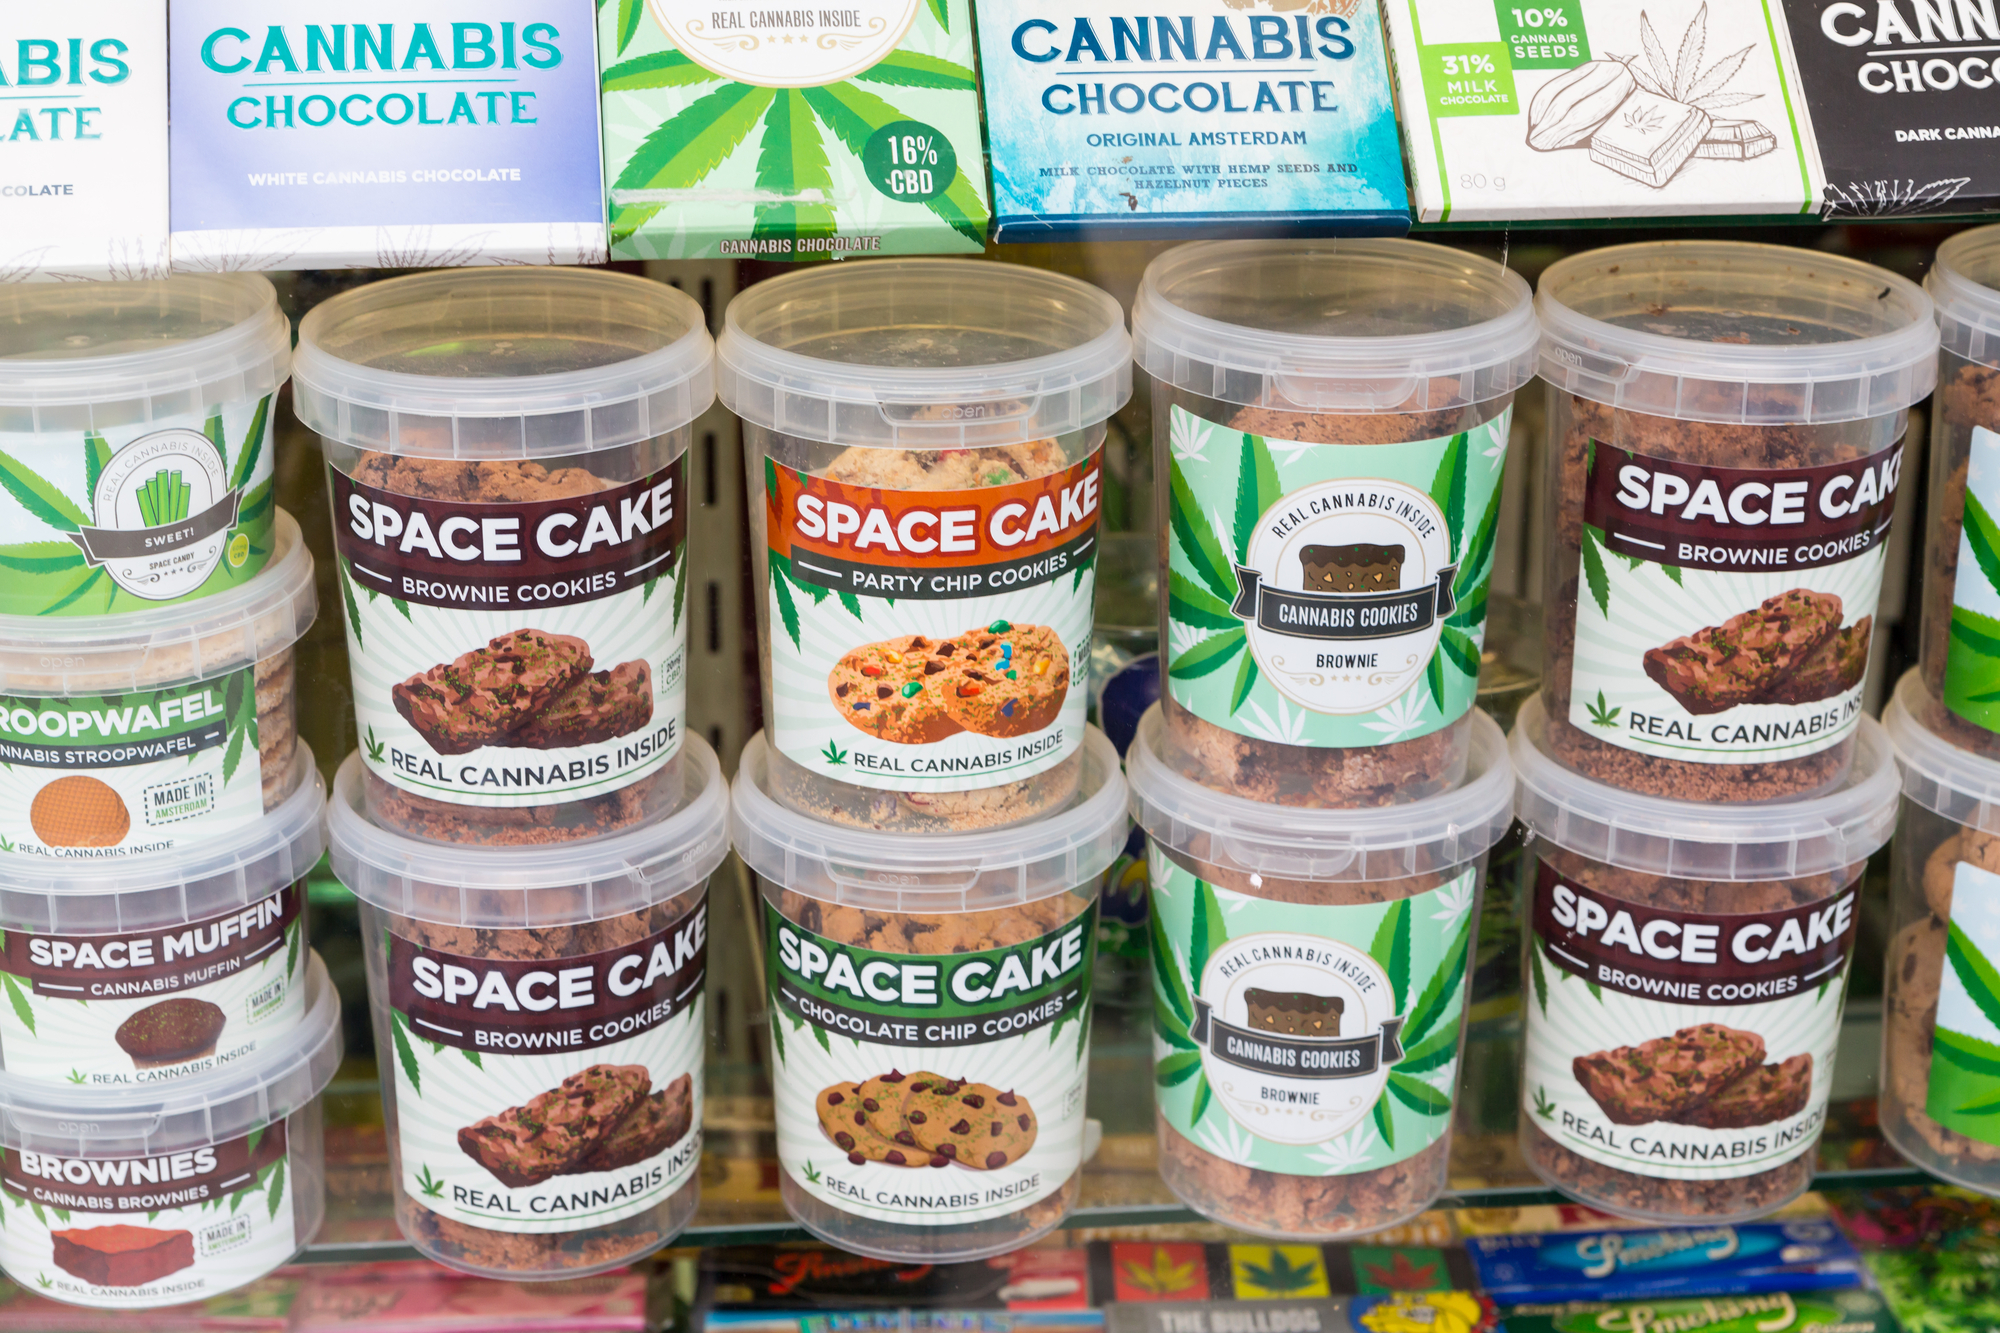 What are space cakes, are space cakes safe?